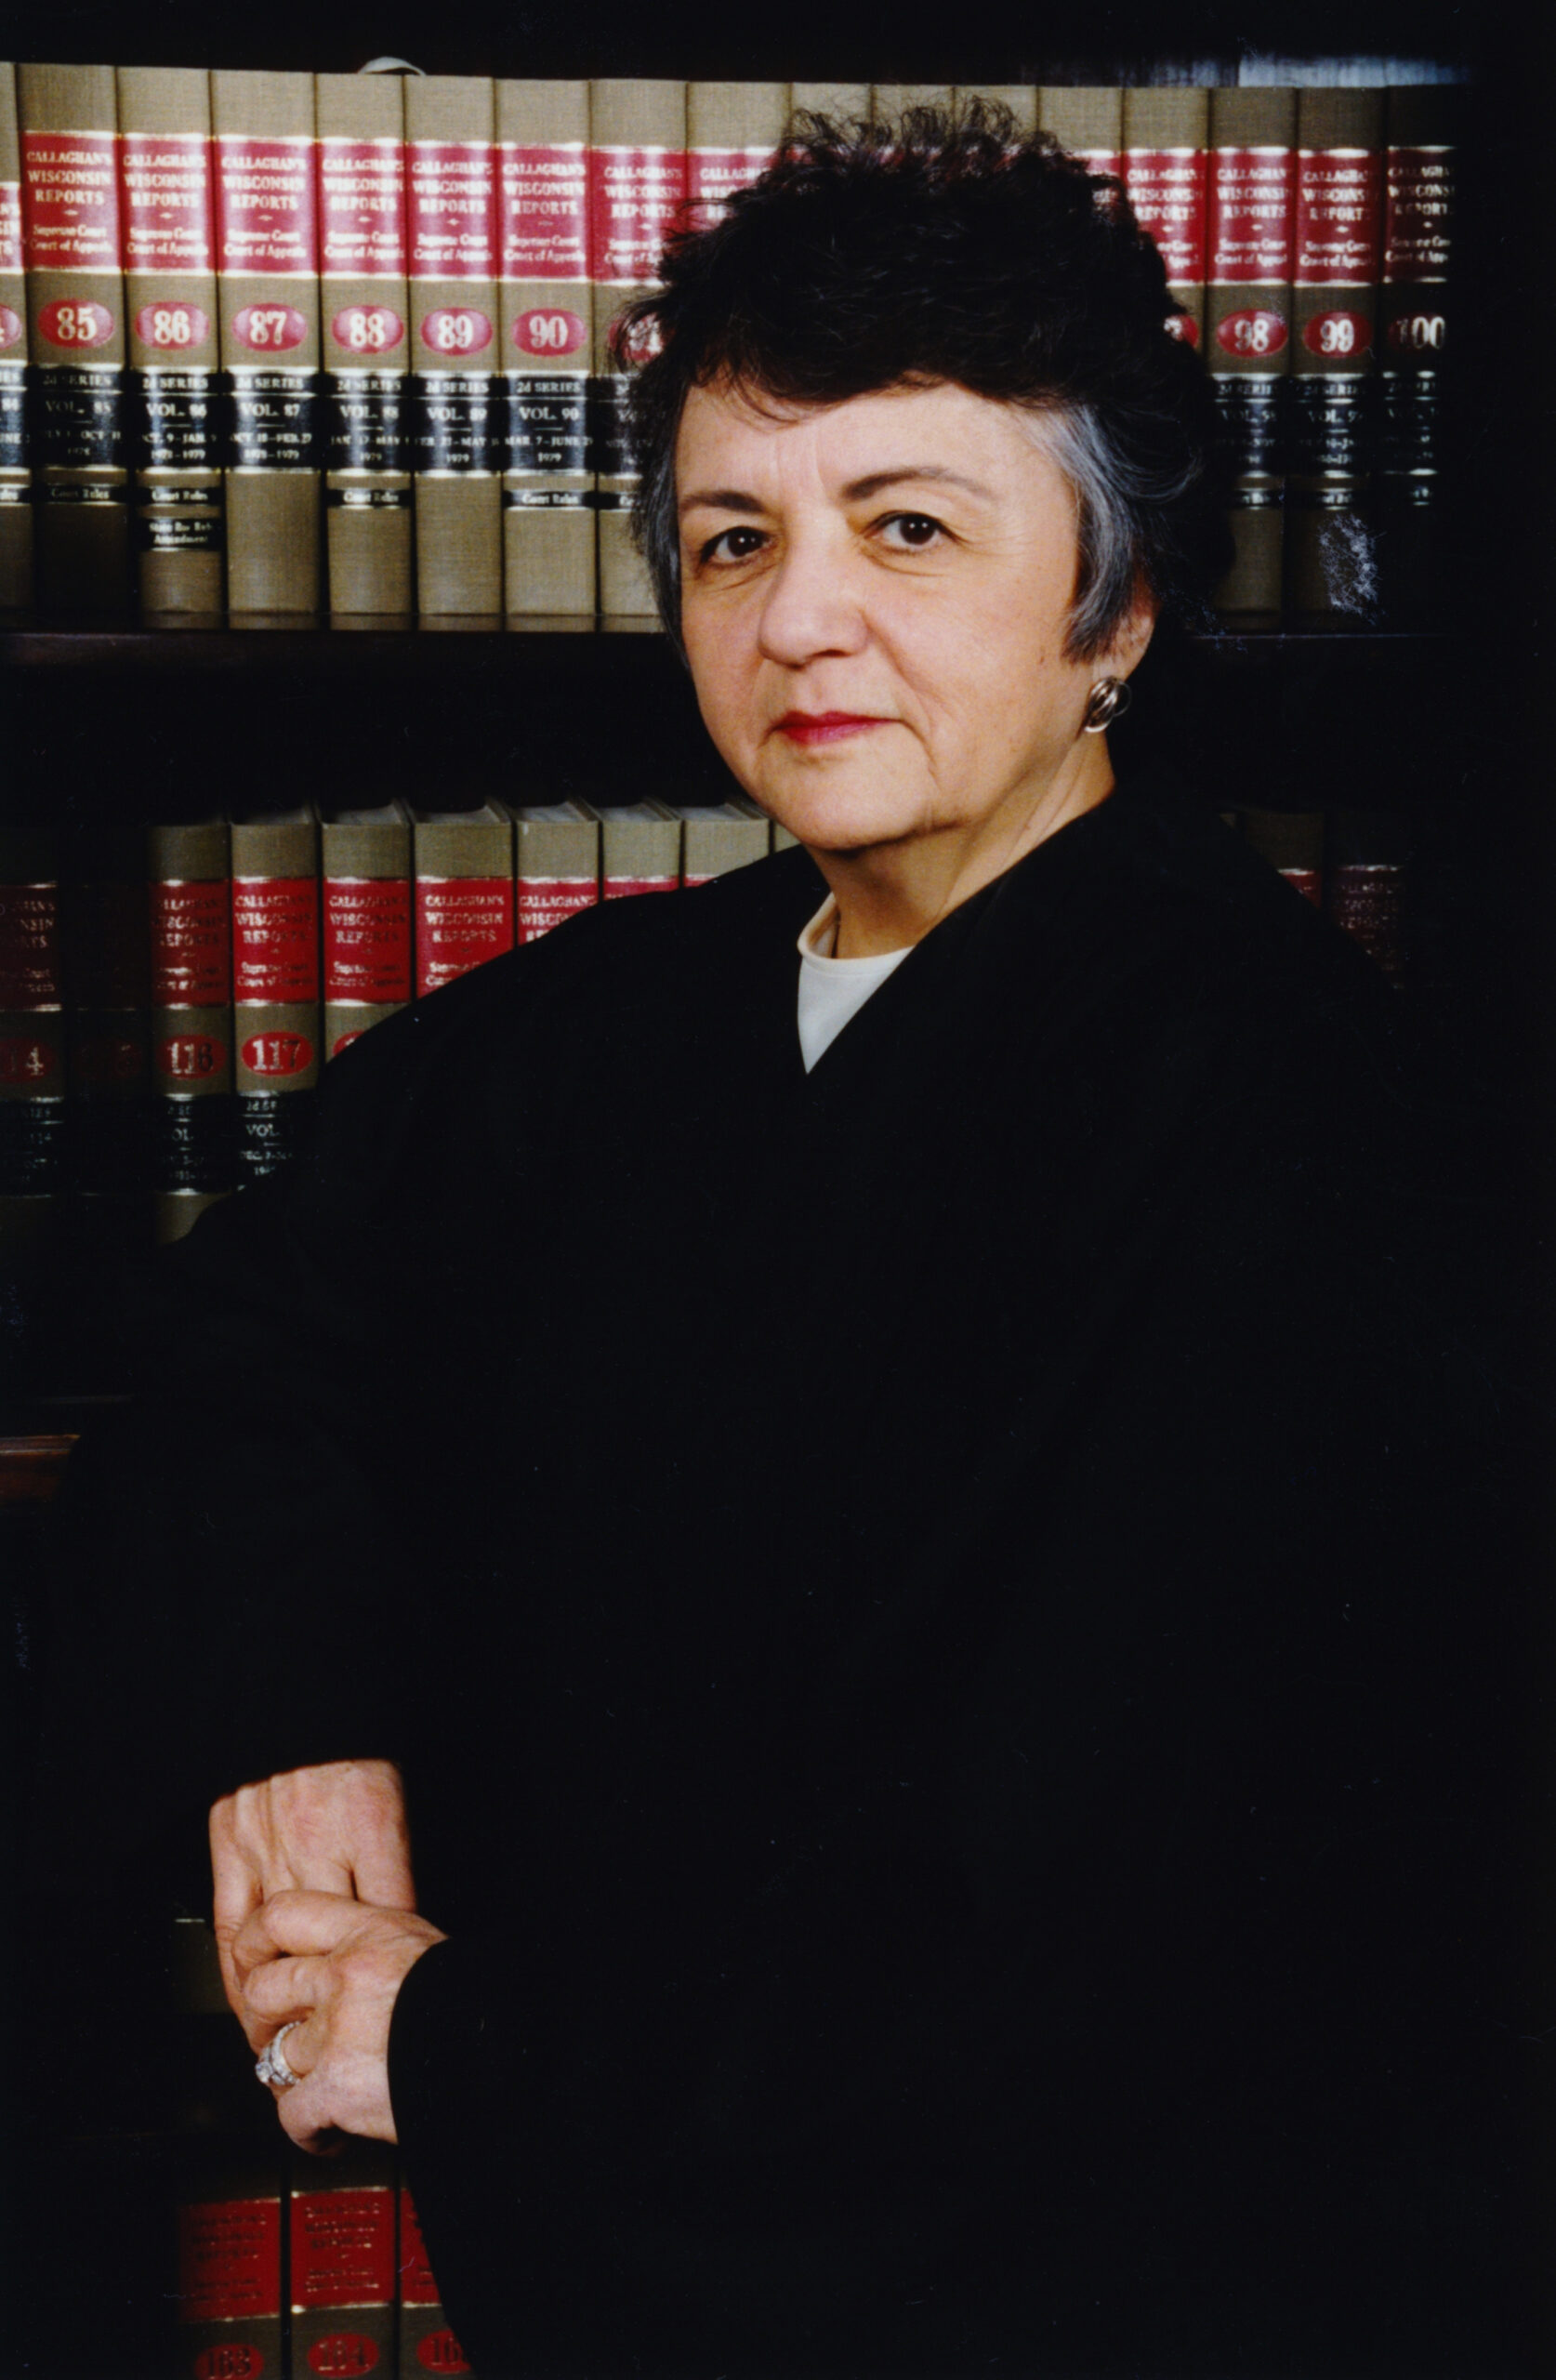 Justice Abrahamson wearing her judicial robes, standing in front of shelves full of law books.